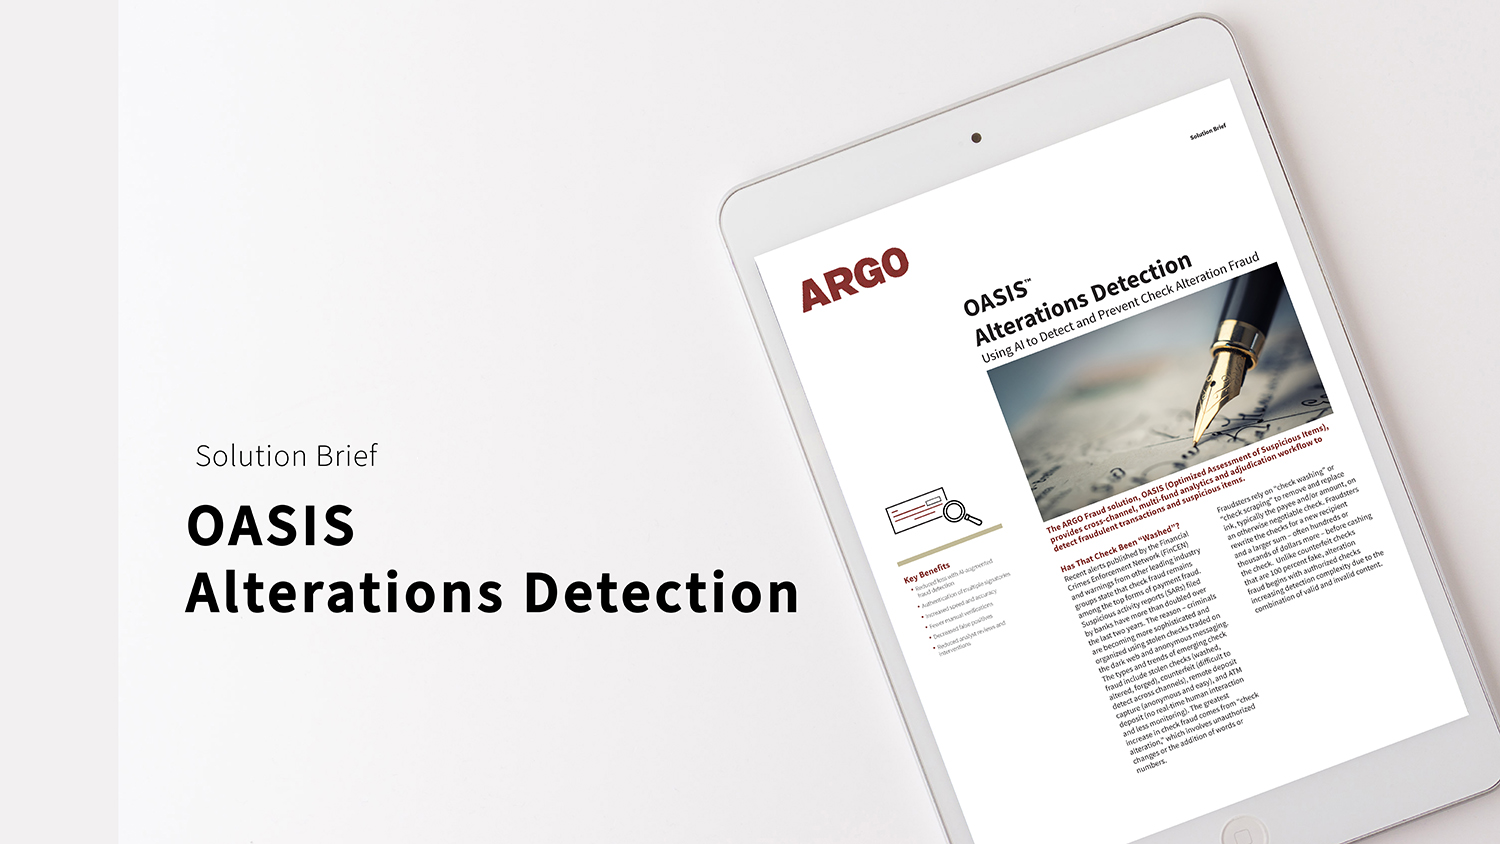 Solution Brief OASIS Alterations Detection